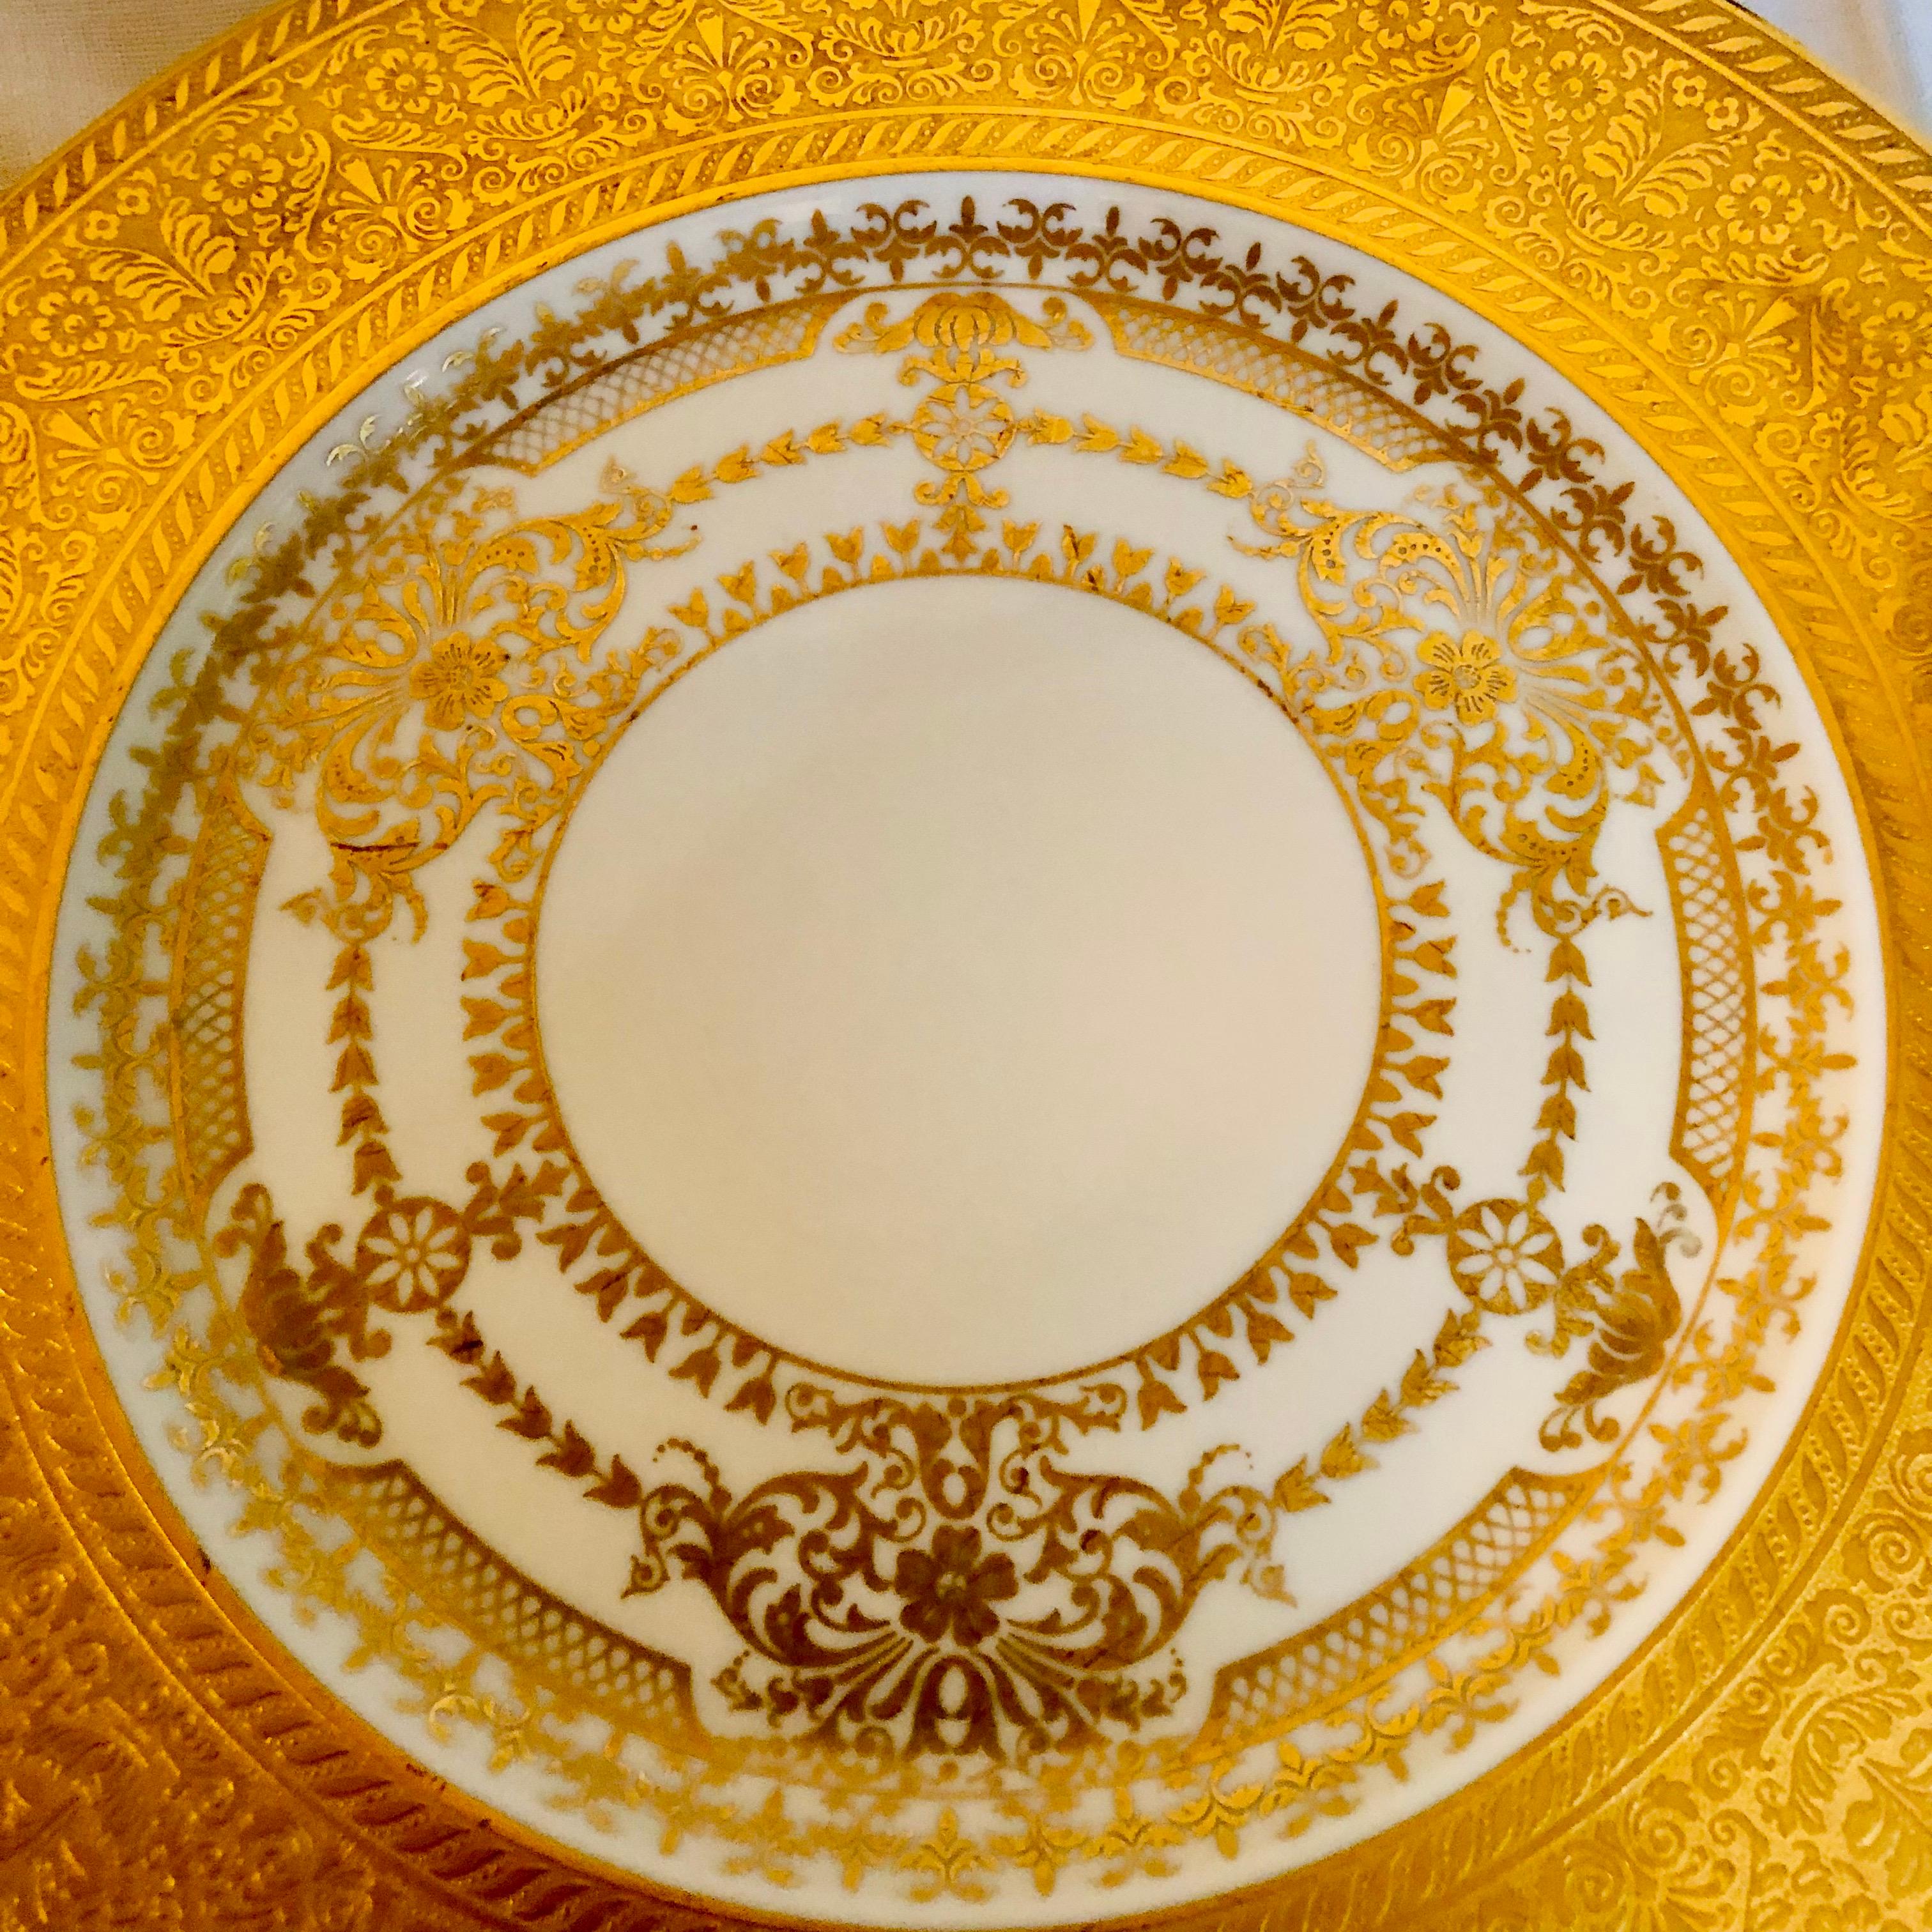 Porcelain Set of 8 Bavarian Service Plates with Thick Border of Gold Embossed Decoration